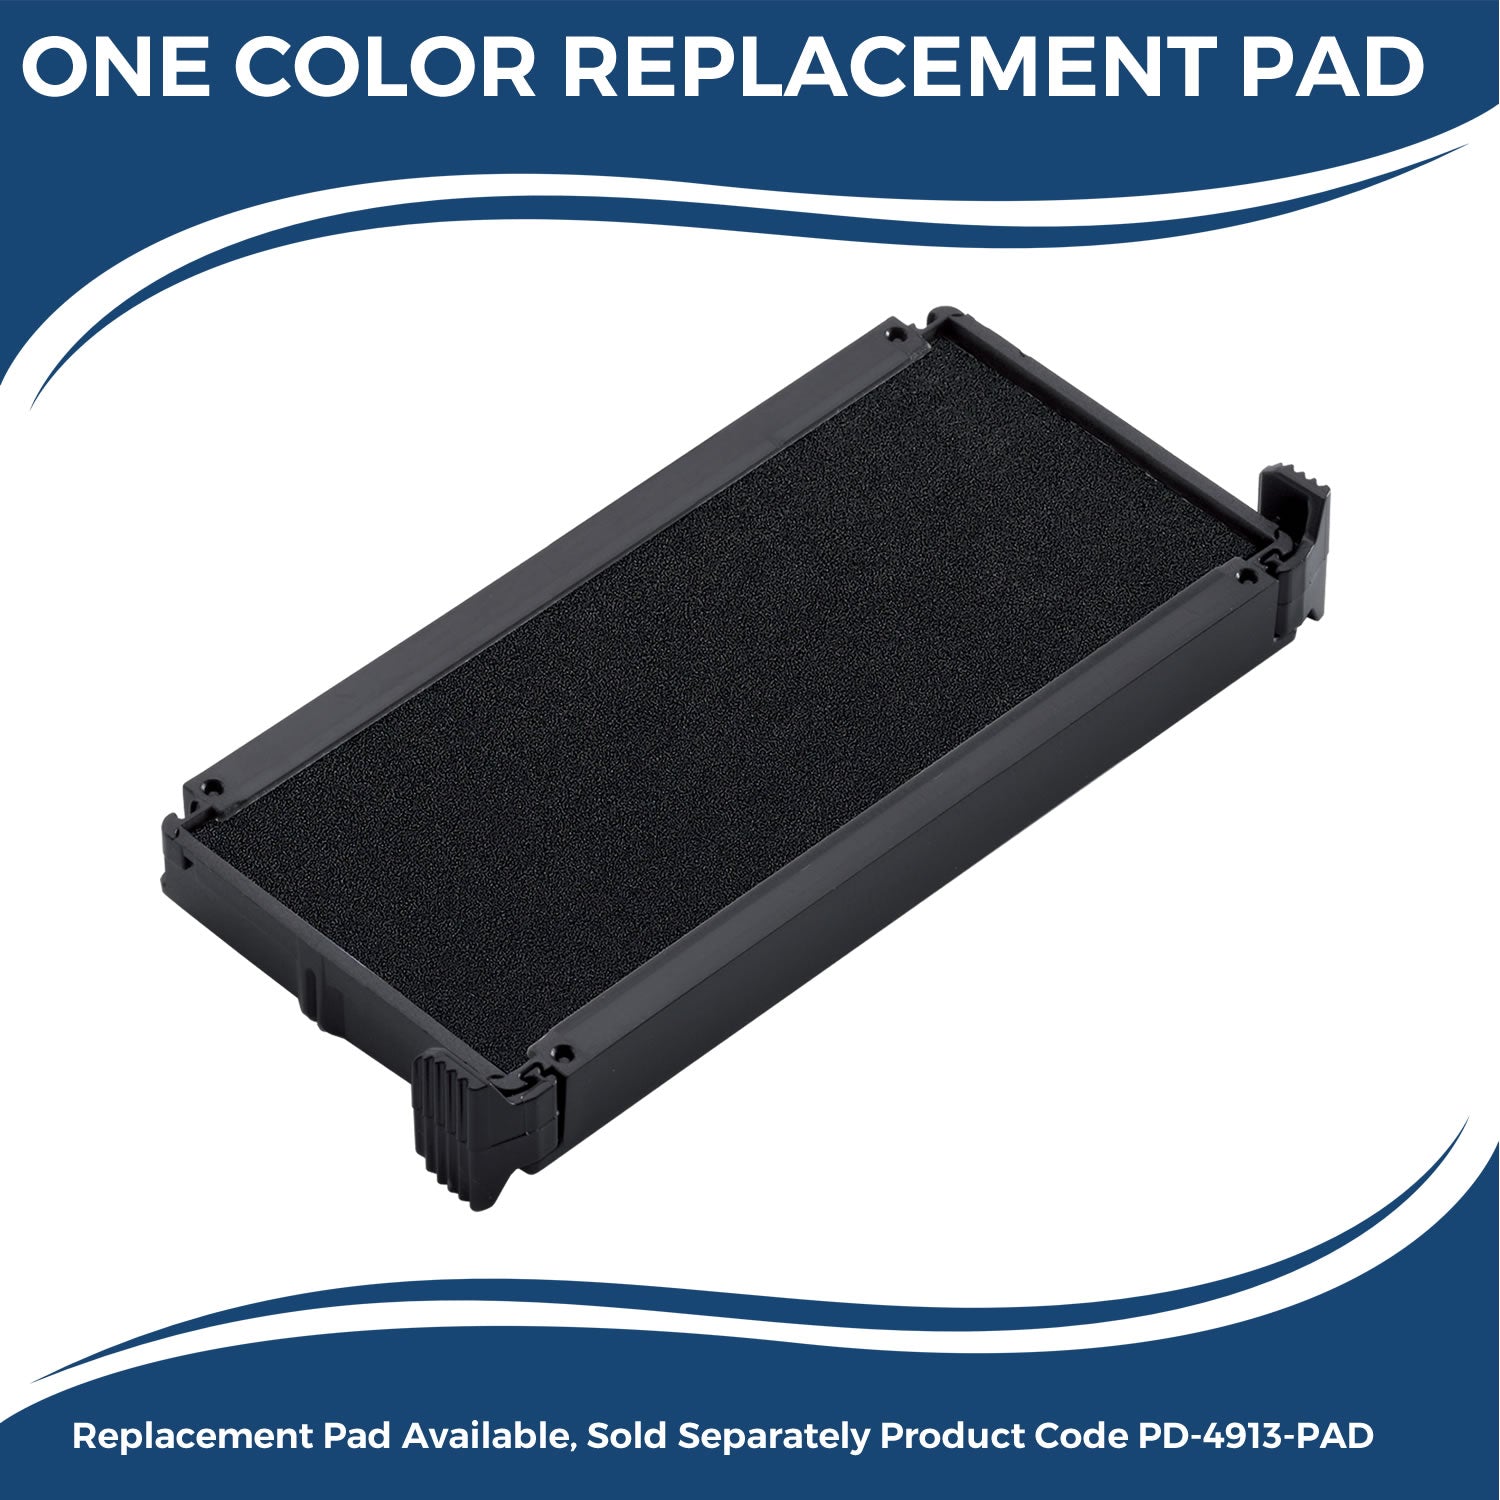 Large Self-Inking Client's Copy Stamp 4861S Large Replacment Pad